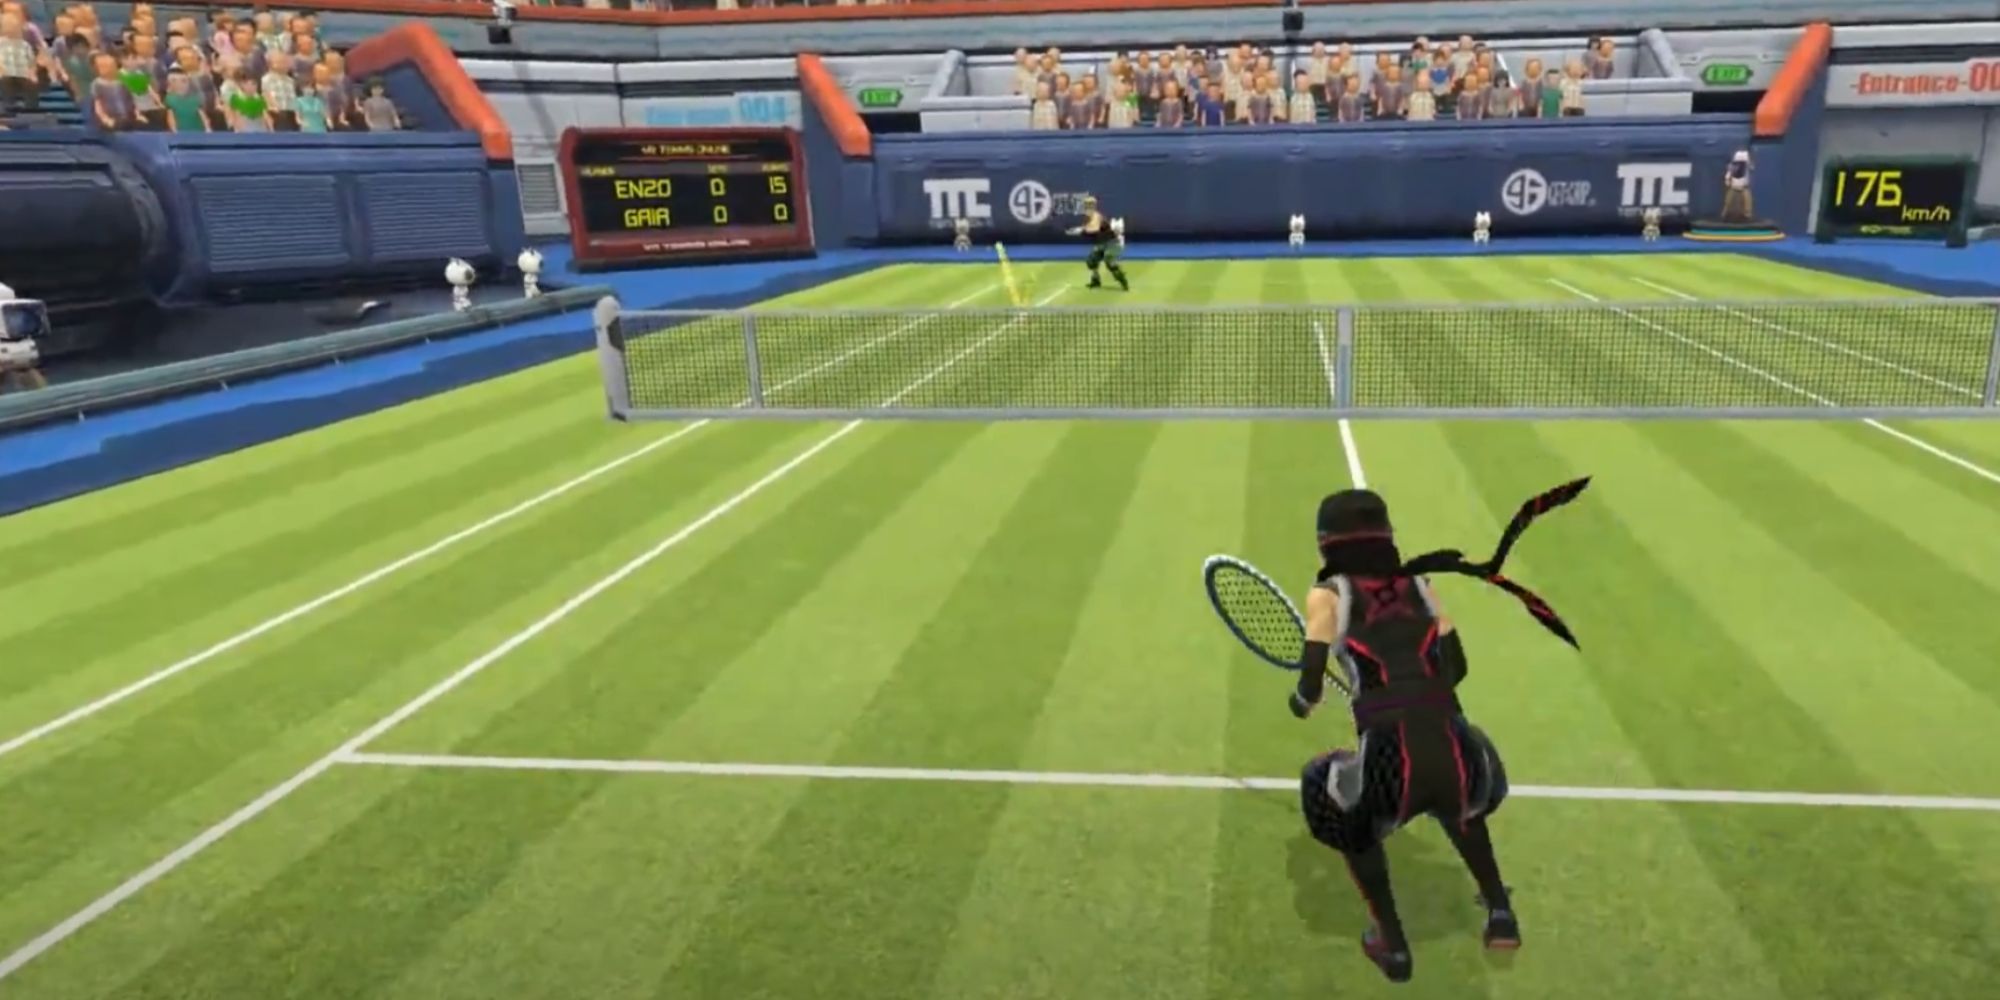 vr_tennis_online_two_characters_playing_tennis